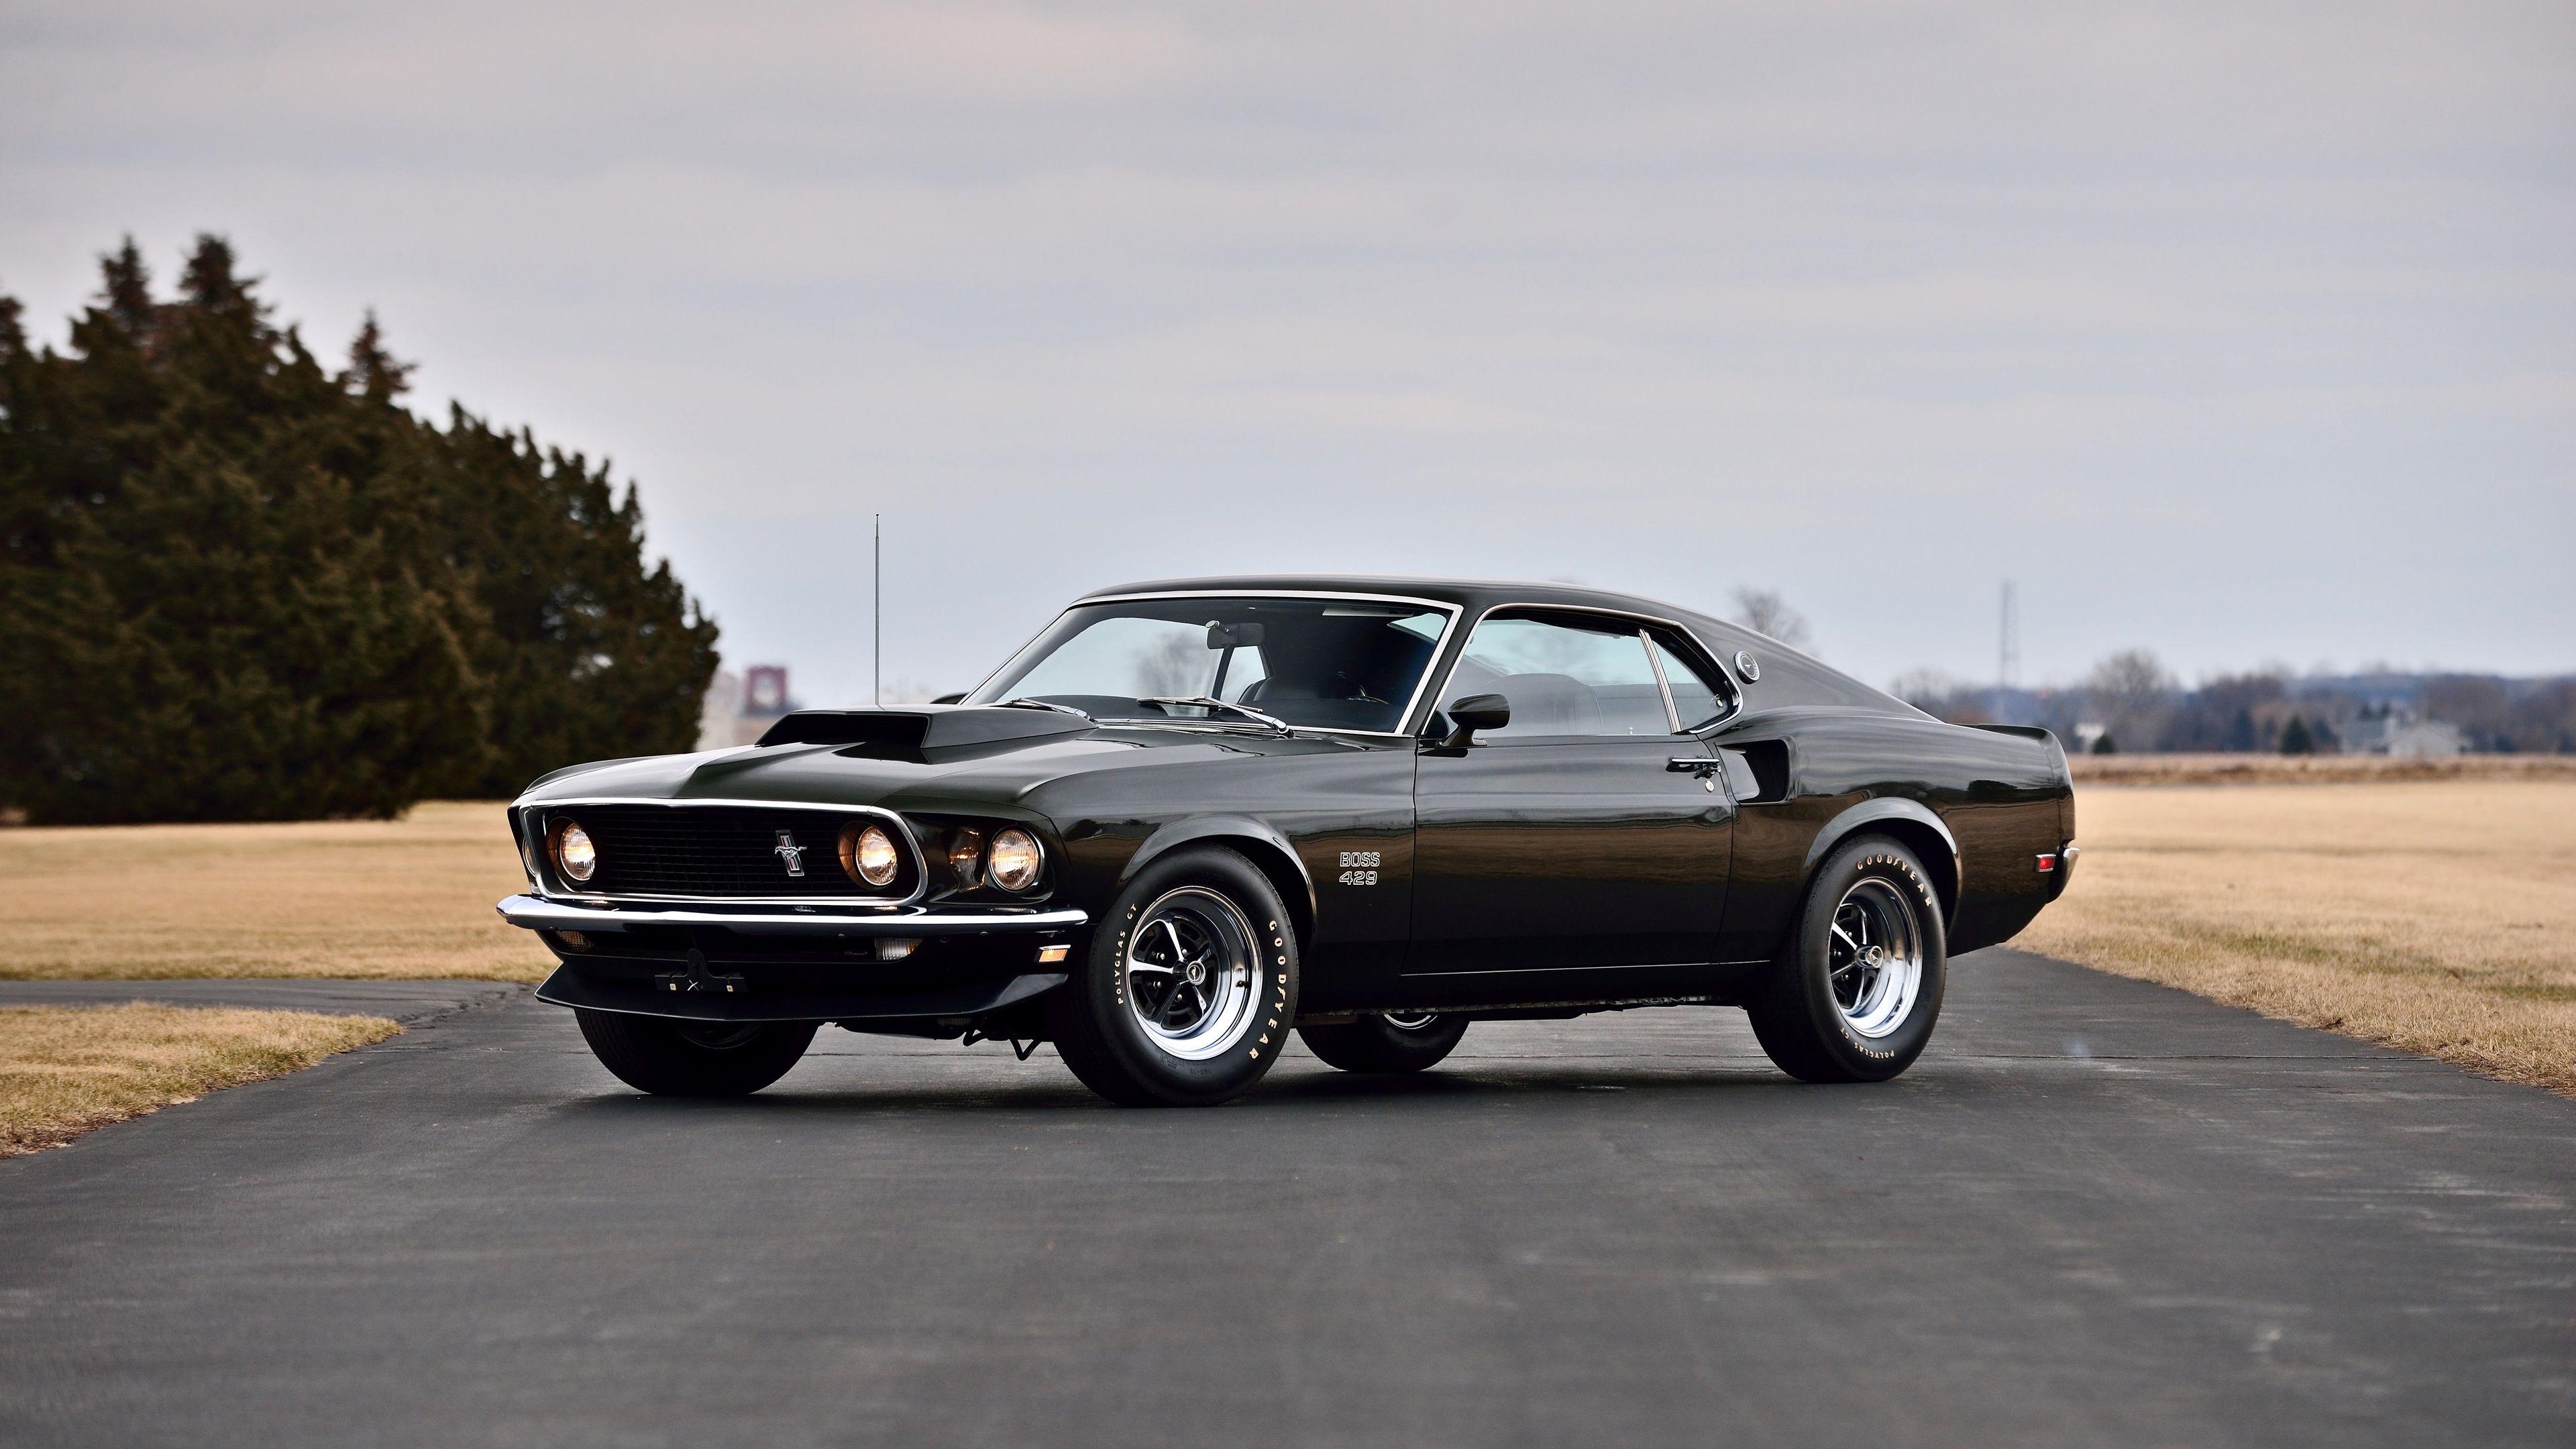 Ford Mustang Boss 429 Fastback Muscle Car hd